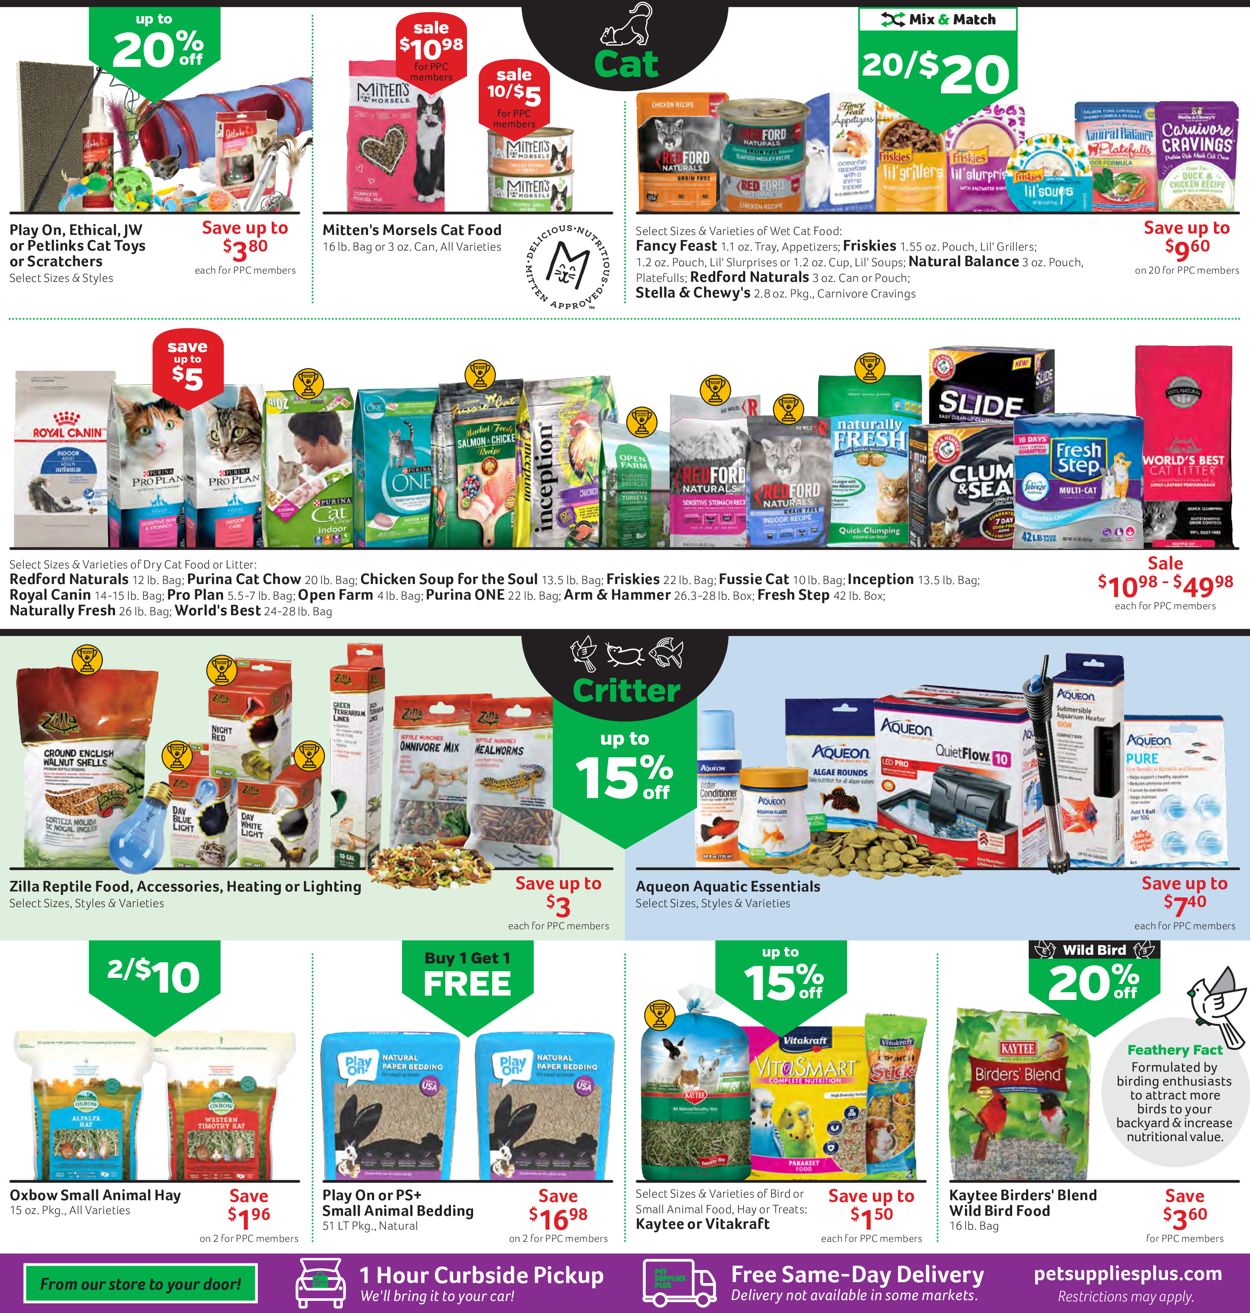 Pet Supplies Plus Current weekly ad 01/28 02/24/2021 [3] frequent